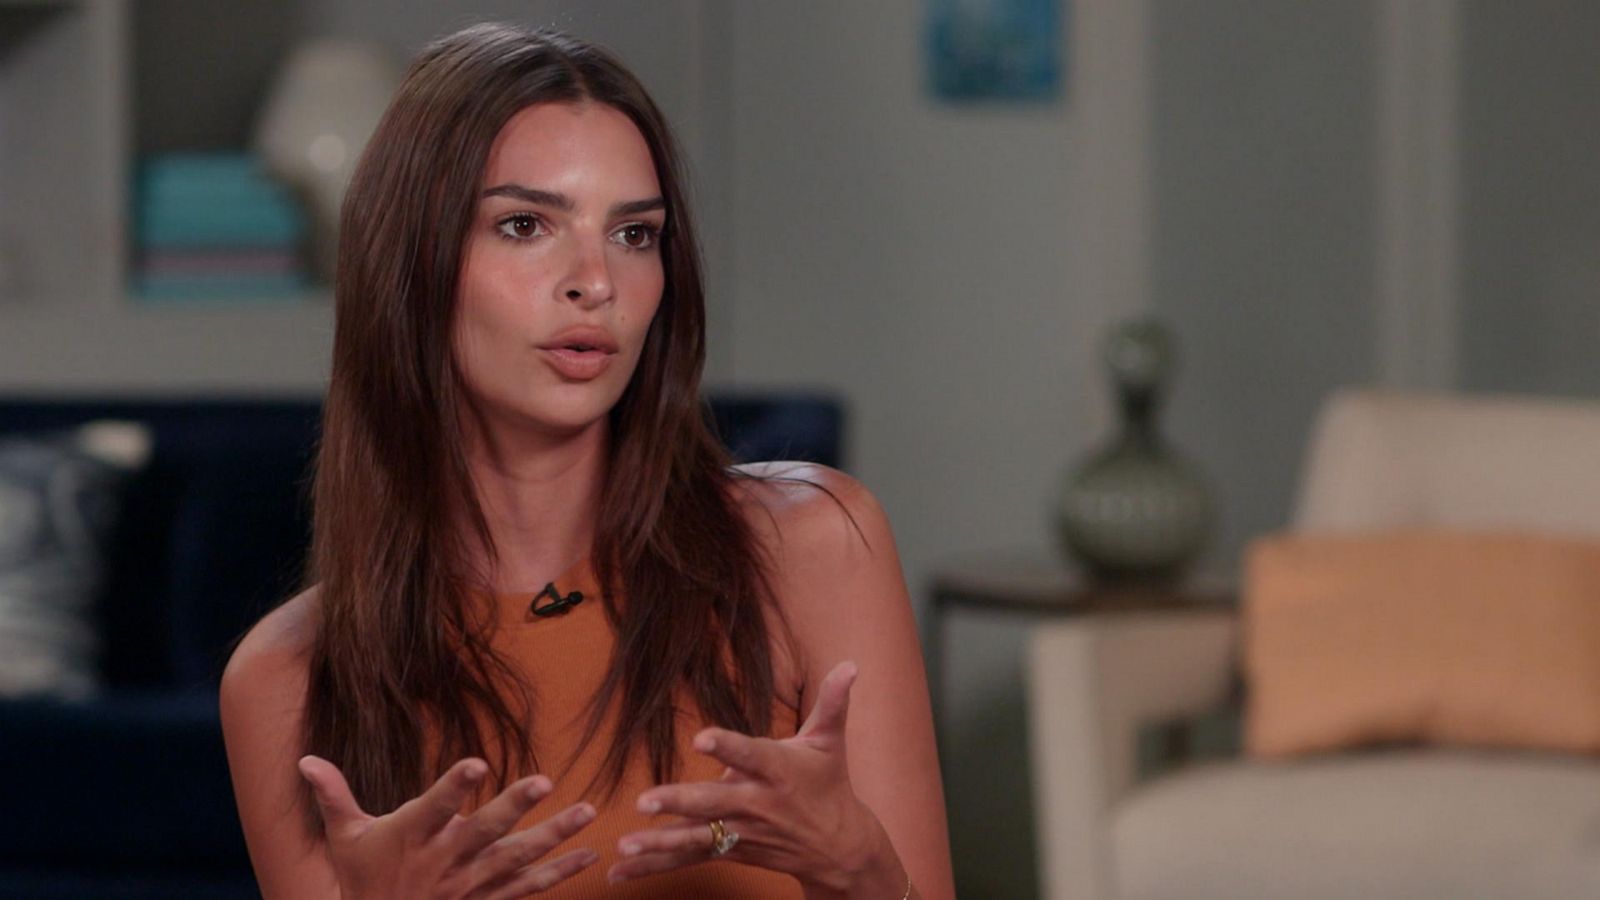 Emily Ratajkowski says no one should &#39;judge&#39; women for &#39;how they represent themselves or their body&#39; - ABC News